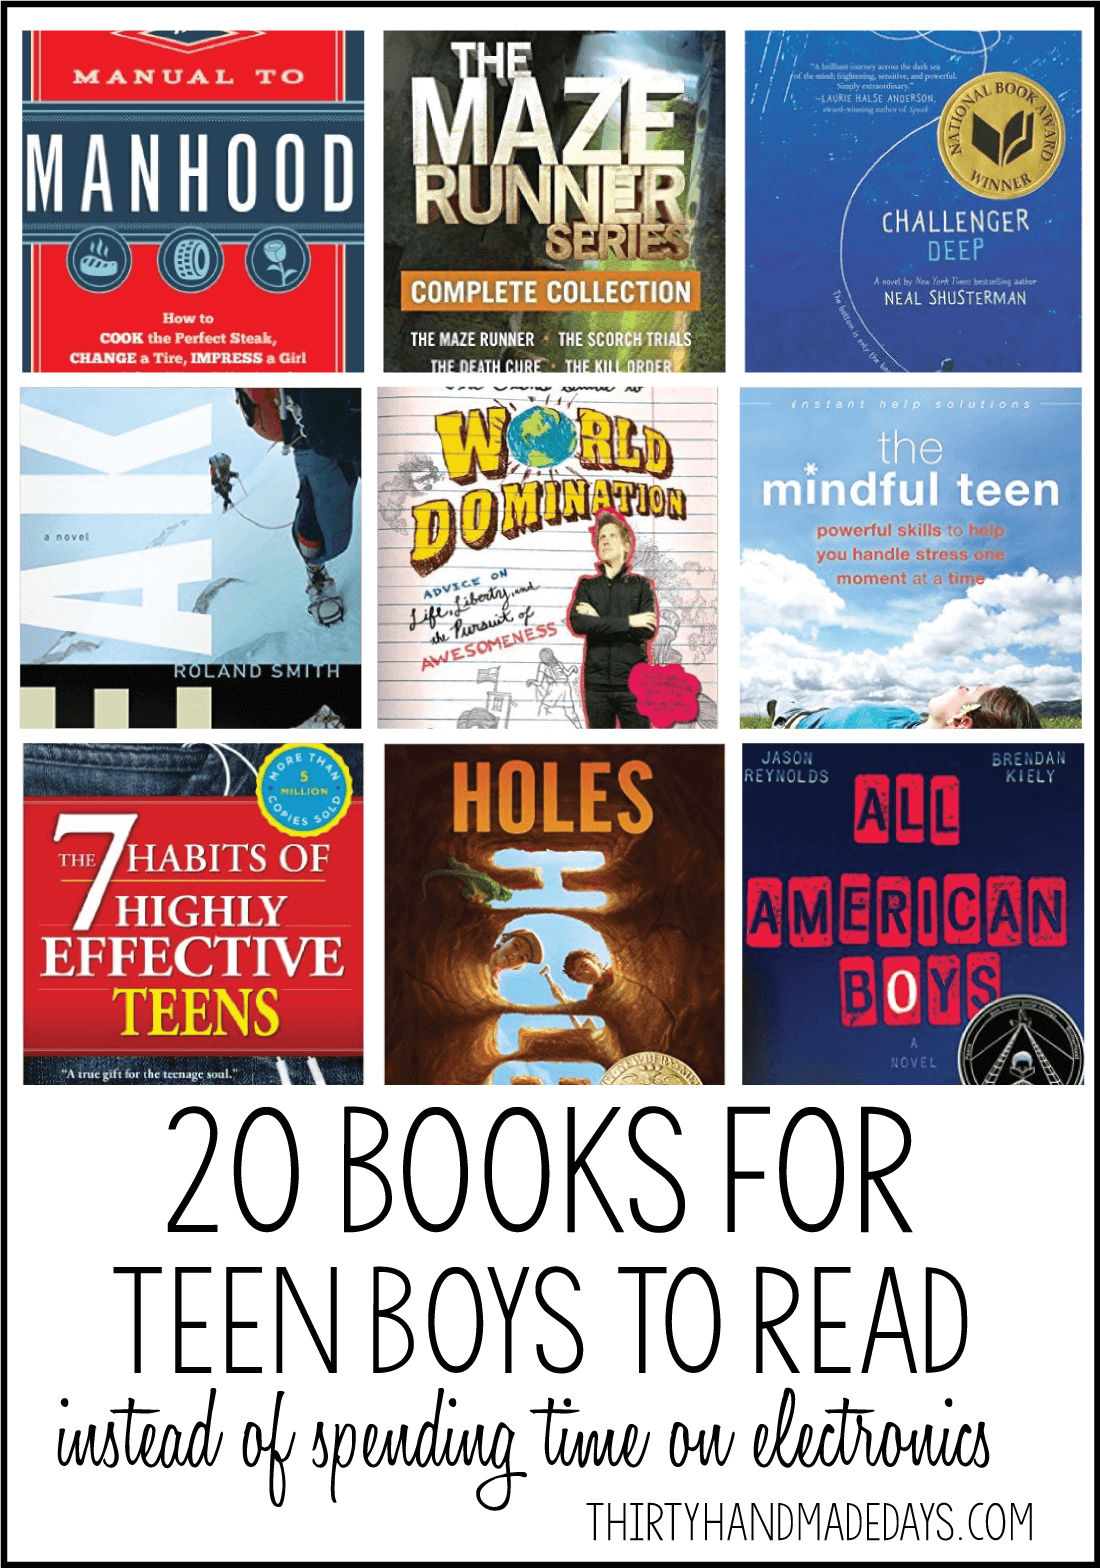 20 Books for Teen Boys To Read from 30daysblog